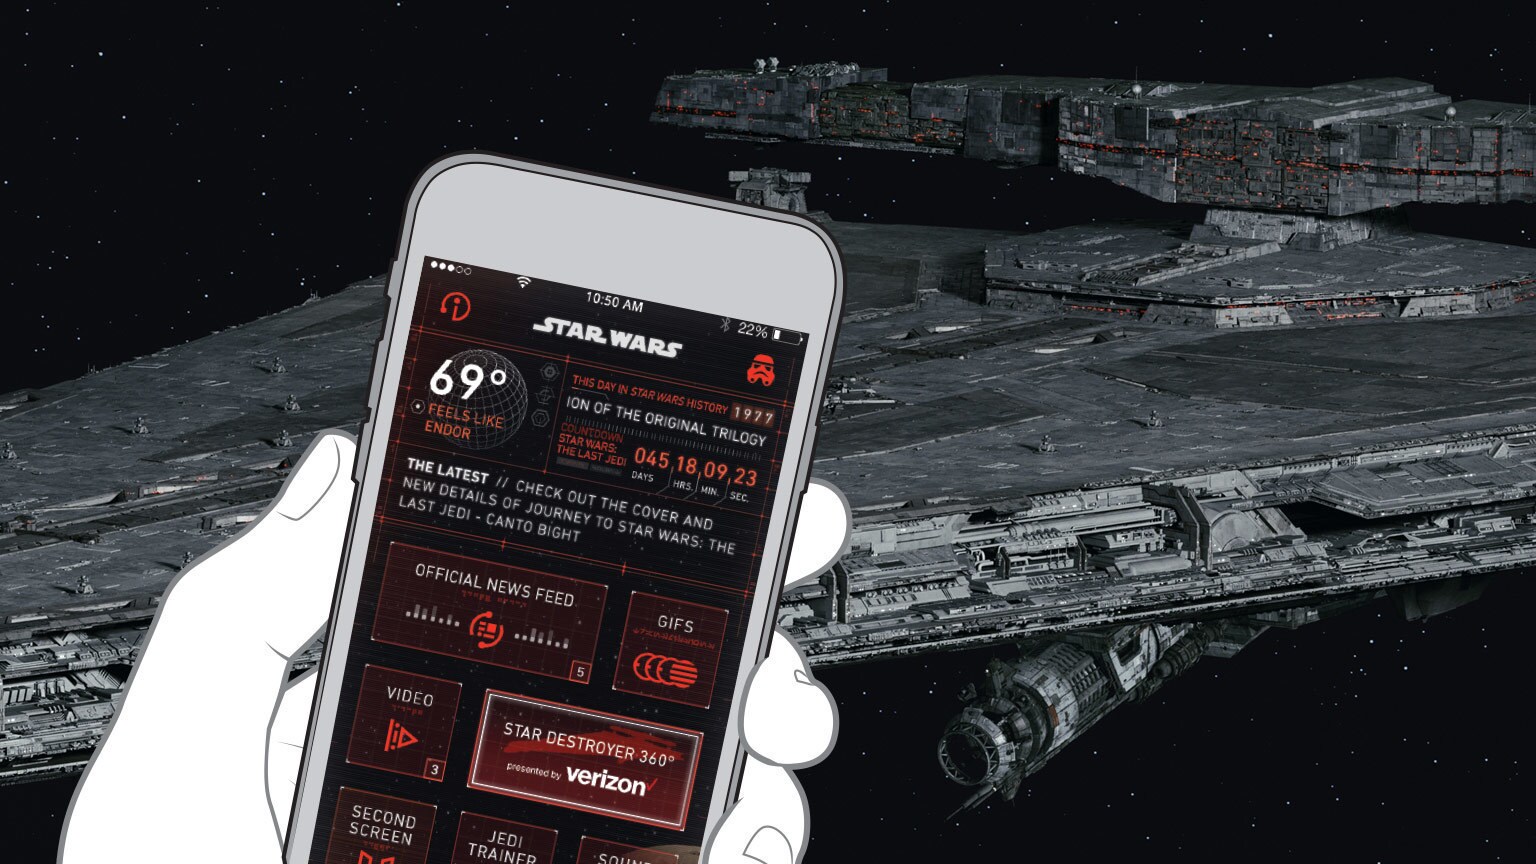 The First Order Arrives...in the Star Wars App - UPDATED